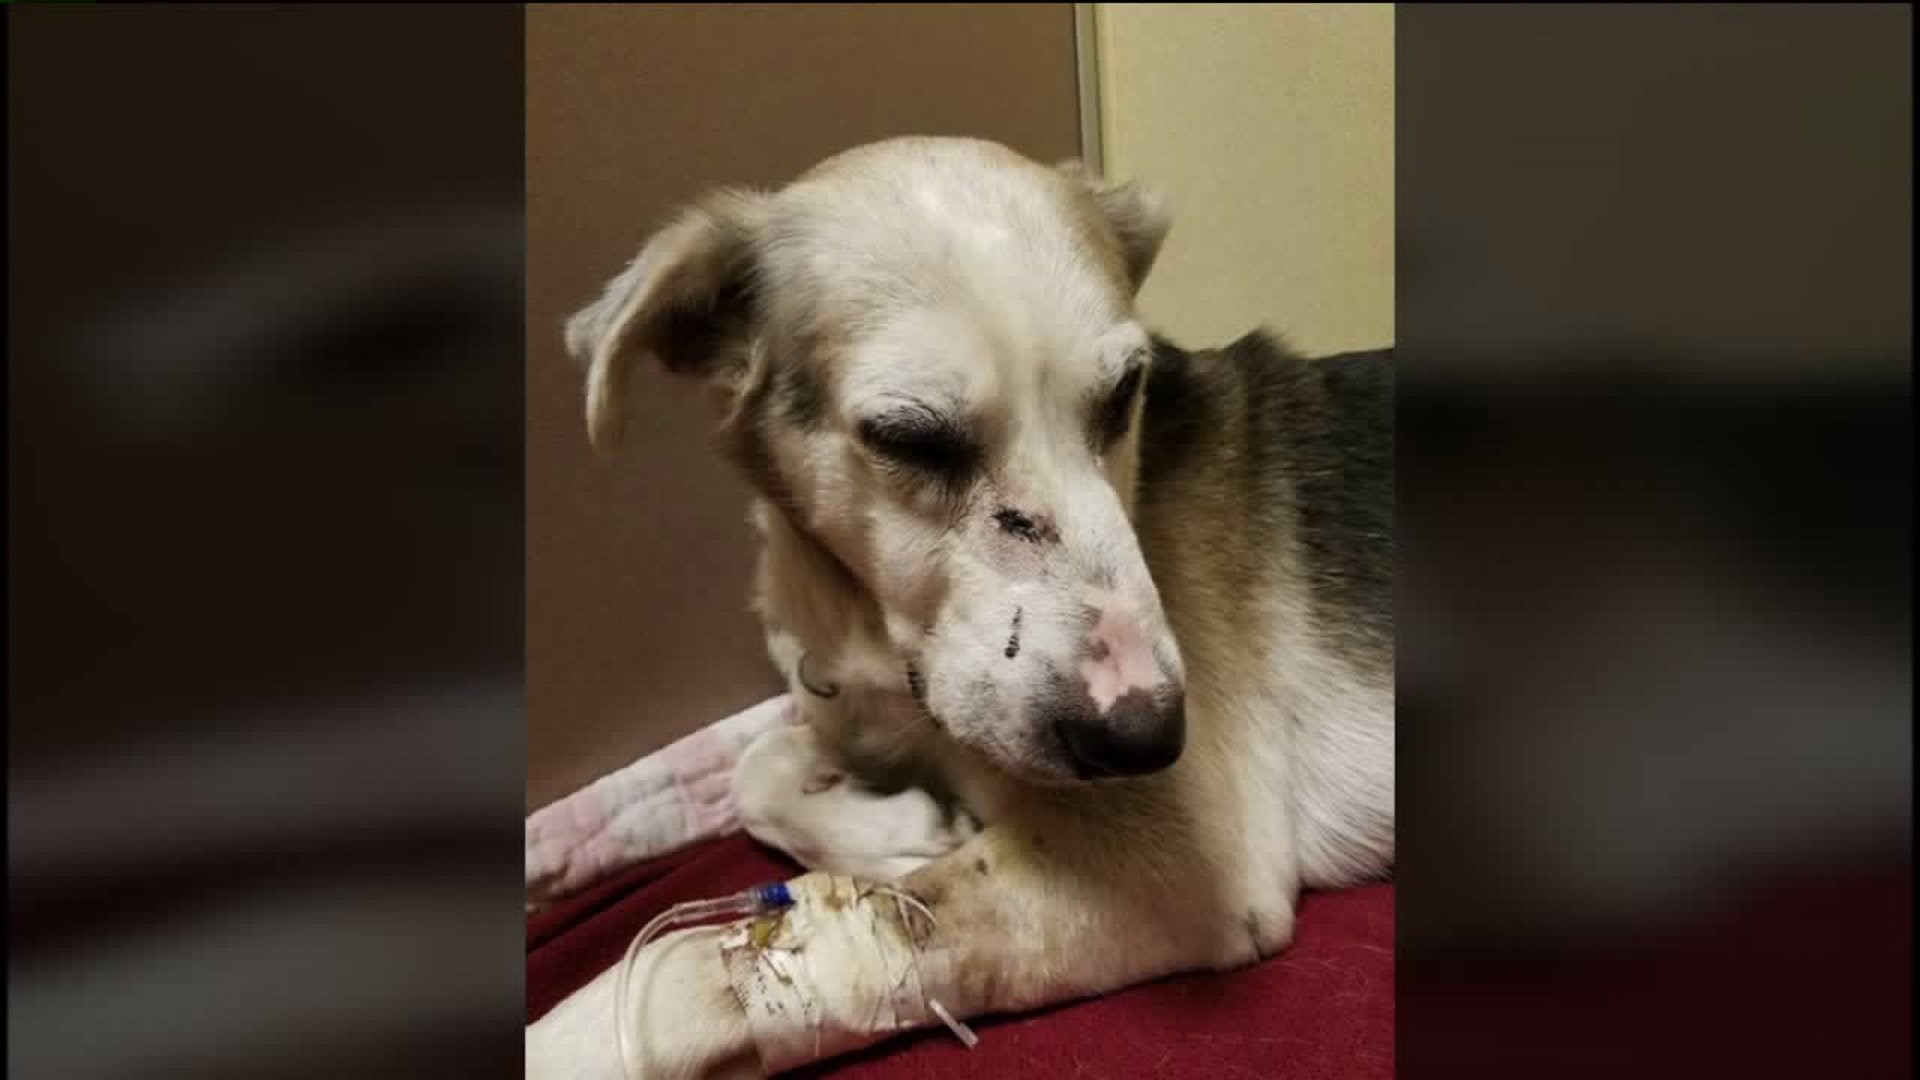 Man Arrested for Shooting Dog in the Face